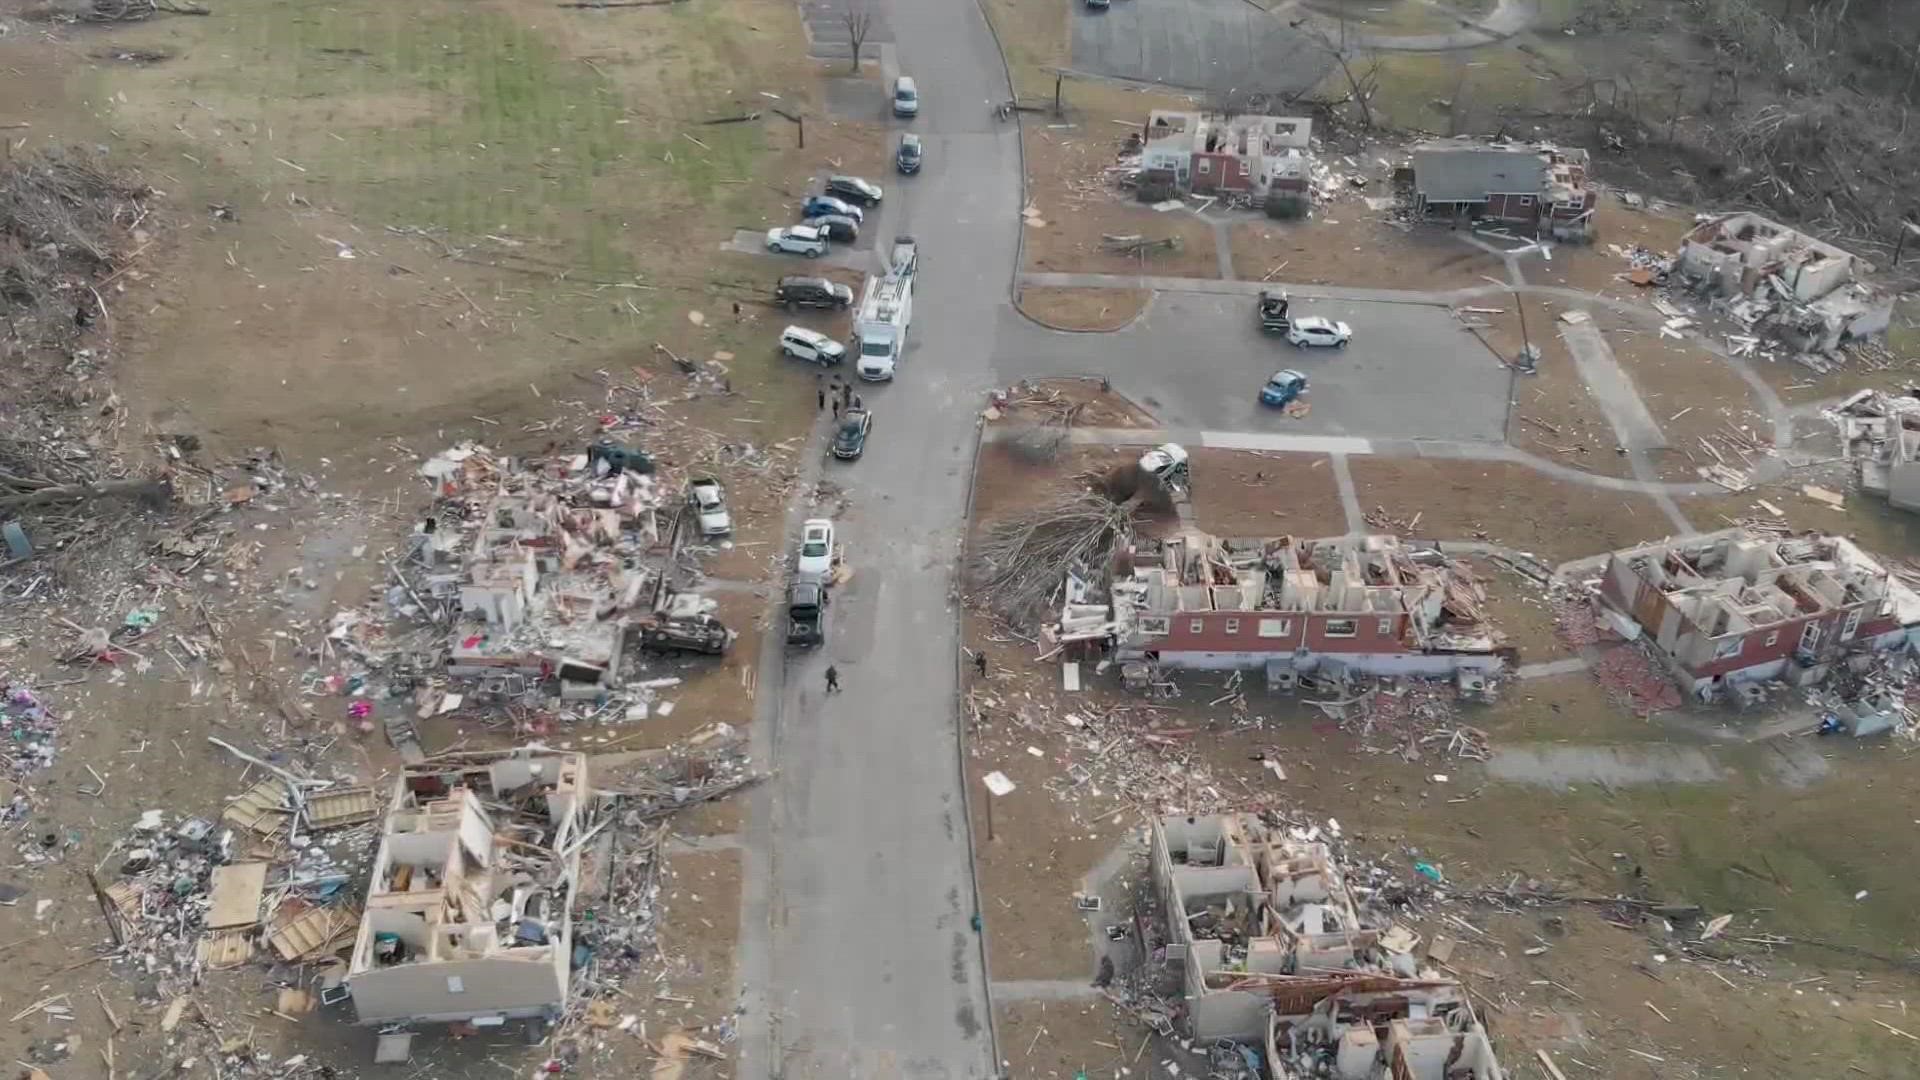 Members of the Dawson Springs community are still reeling days after tornadoes devastated the town of 2,600 over the weekend.